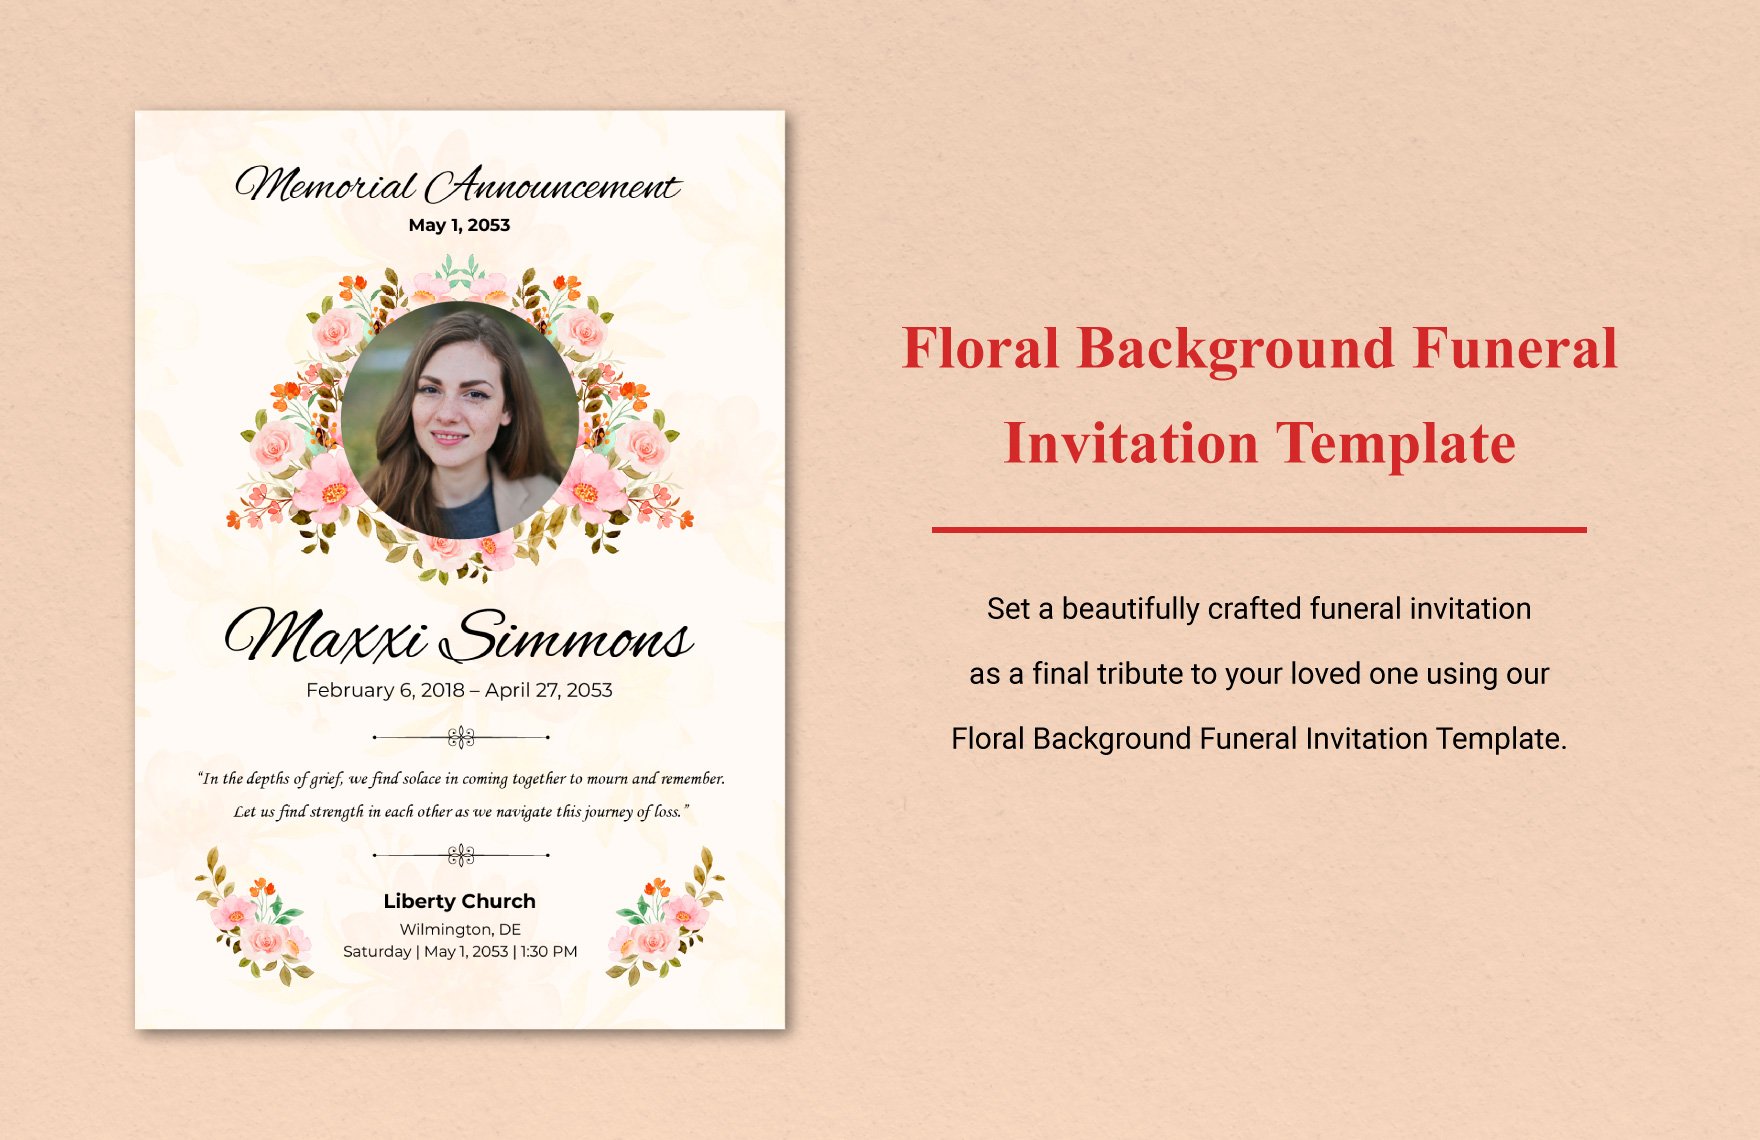 Floral Background Funeral Invitation Template